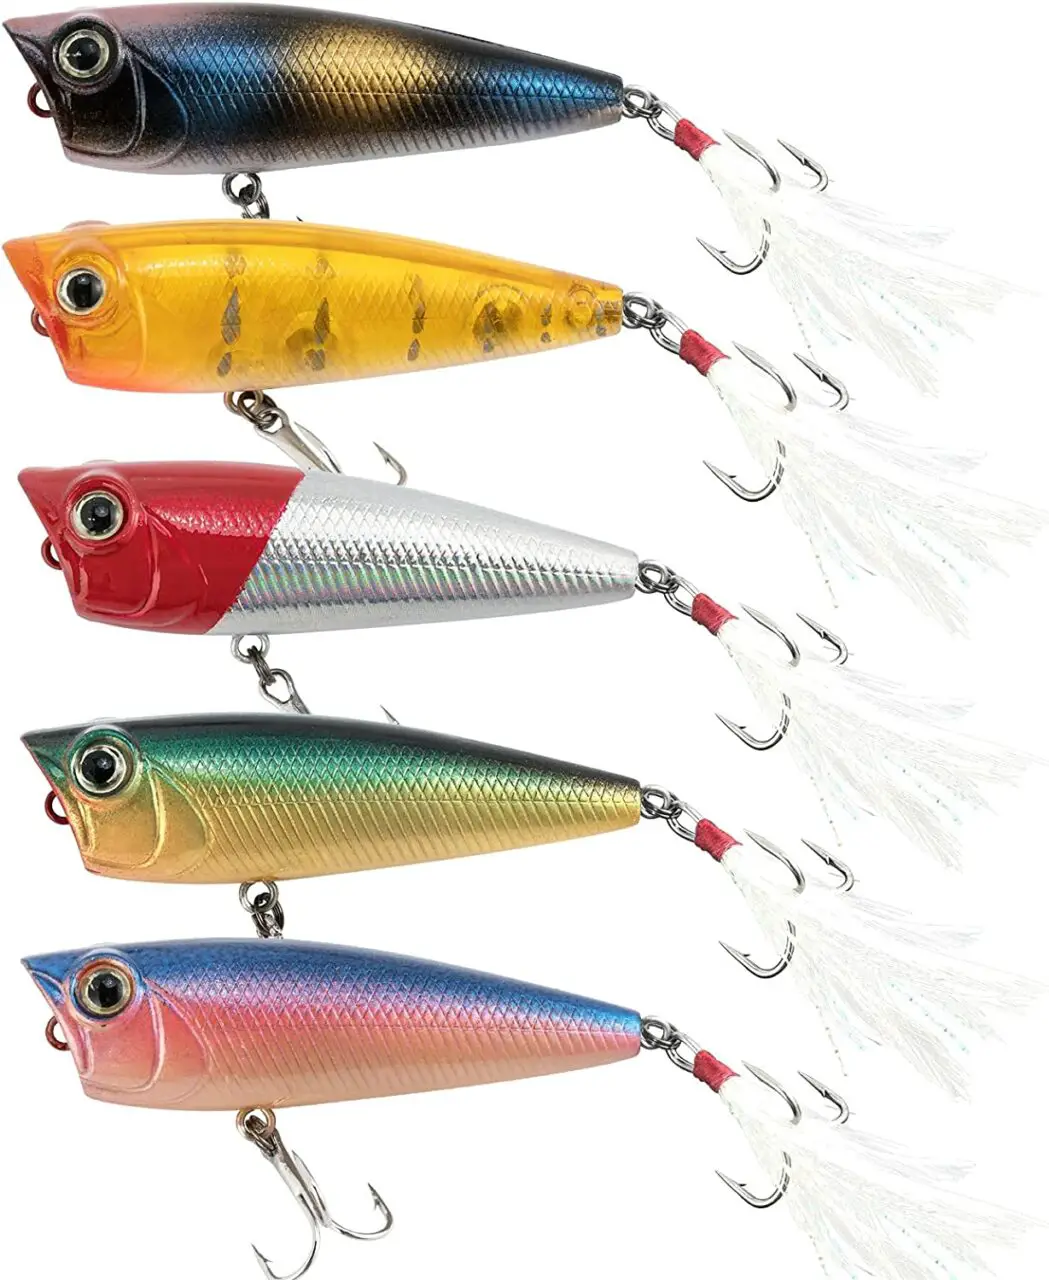 Alwonder 5 Pack Fishing Popper Lure Best Topwater Bass Lures